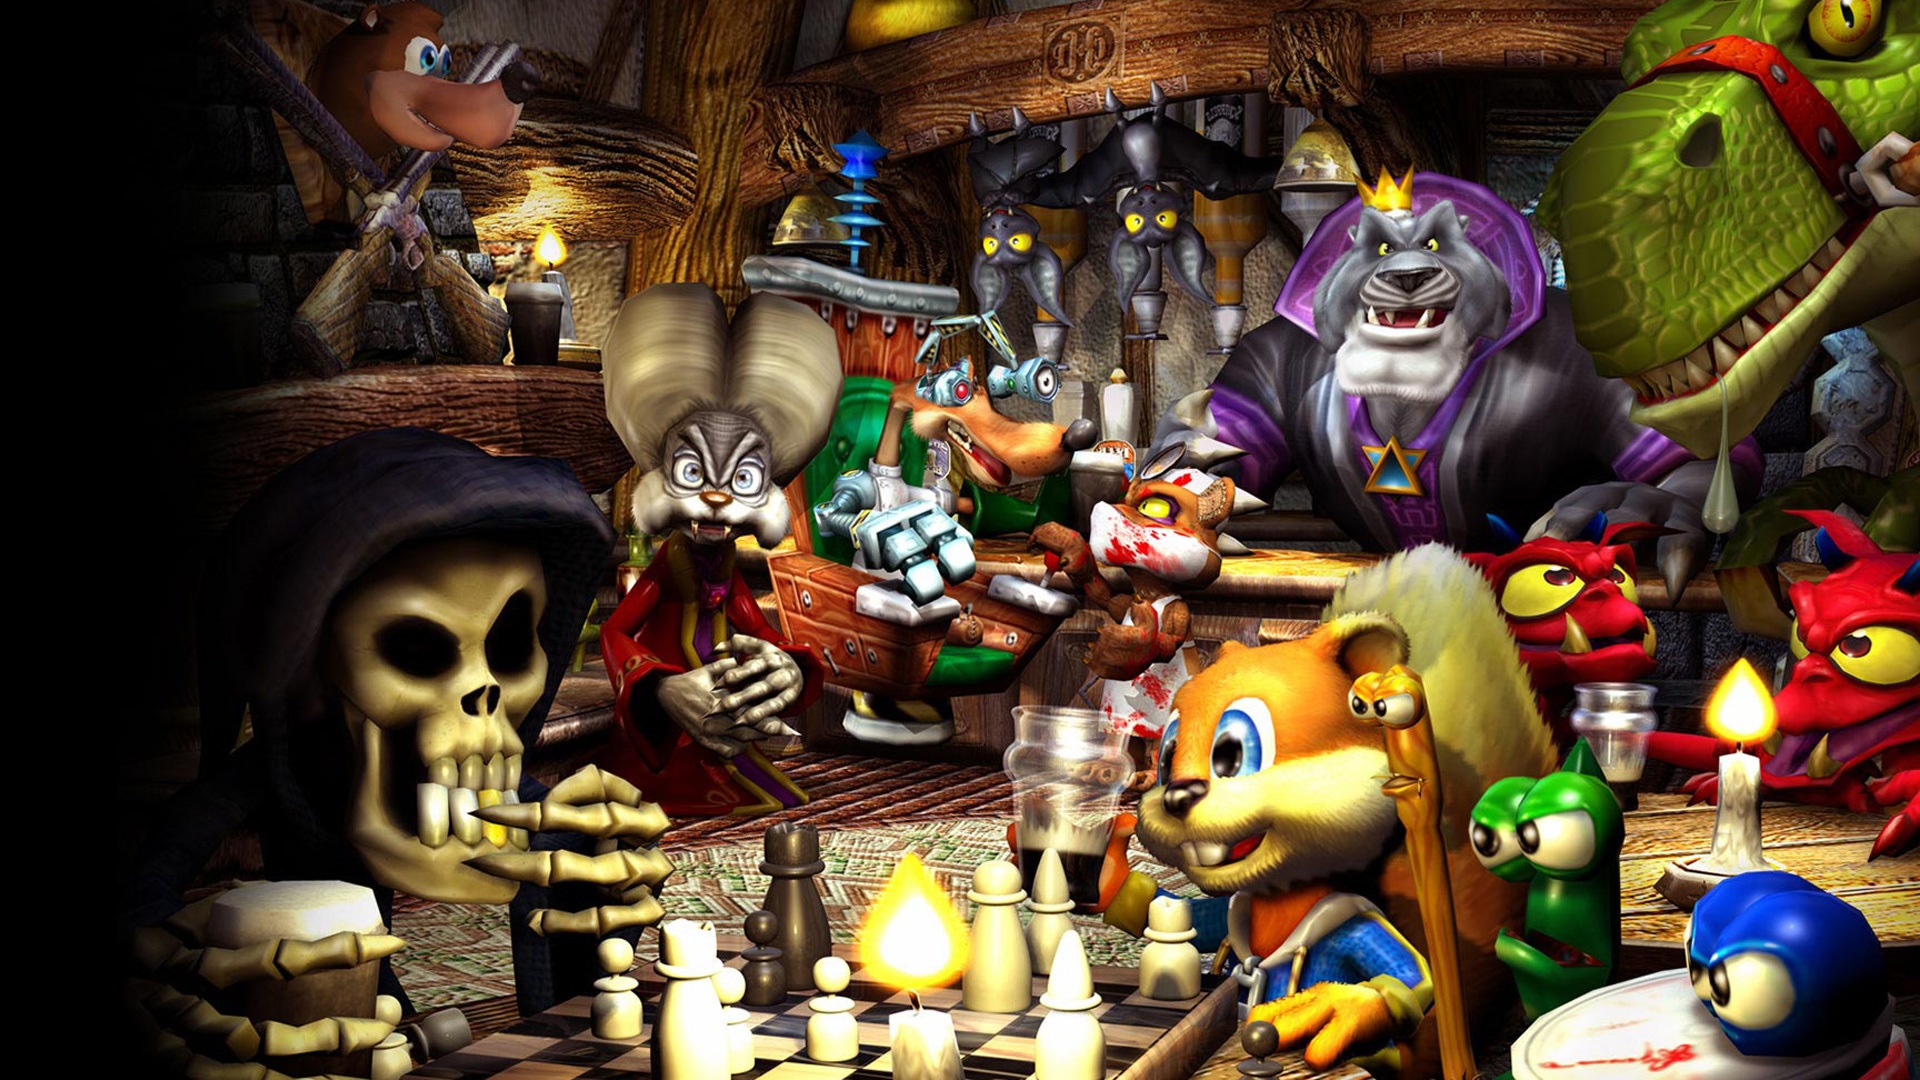 1080p Conker's Bad Fur Day Hd Images